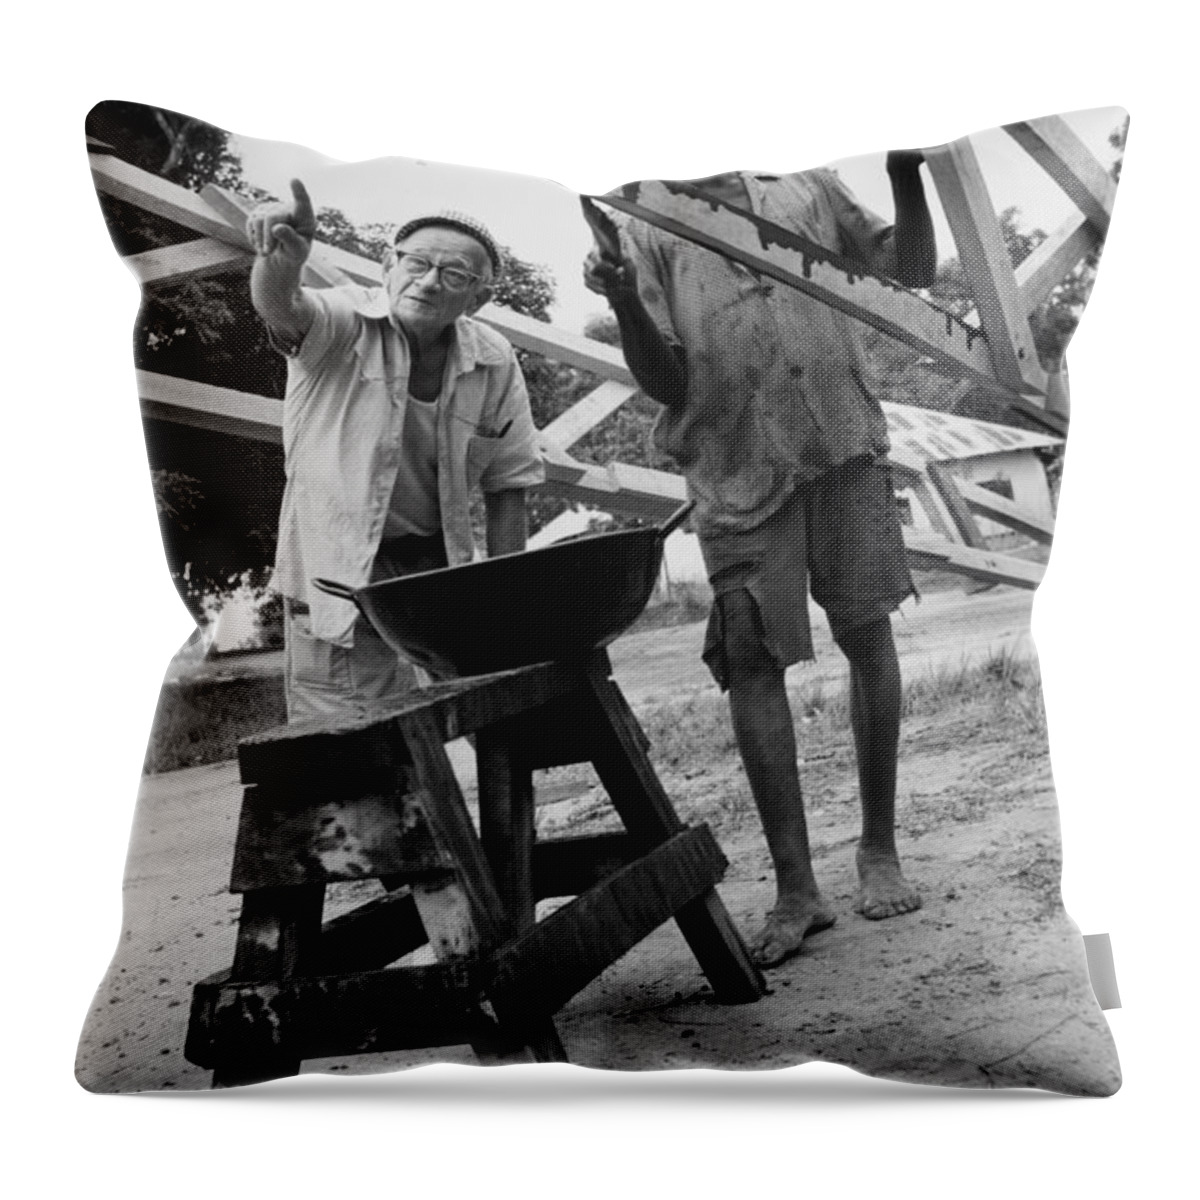 1965 Throw Pillow featuring the photograph Peace Corps Sierra Leone by Granger